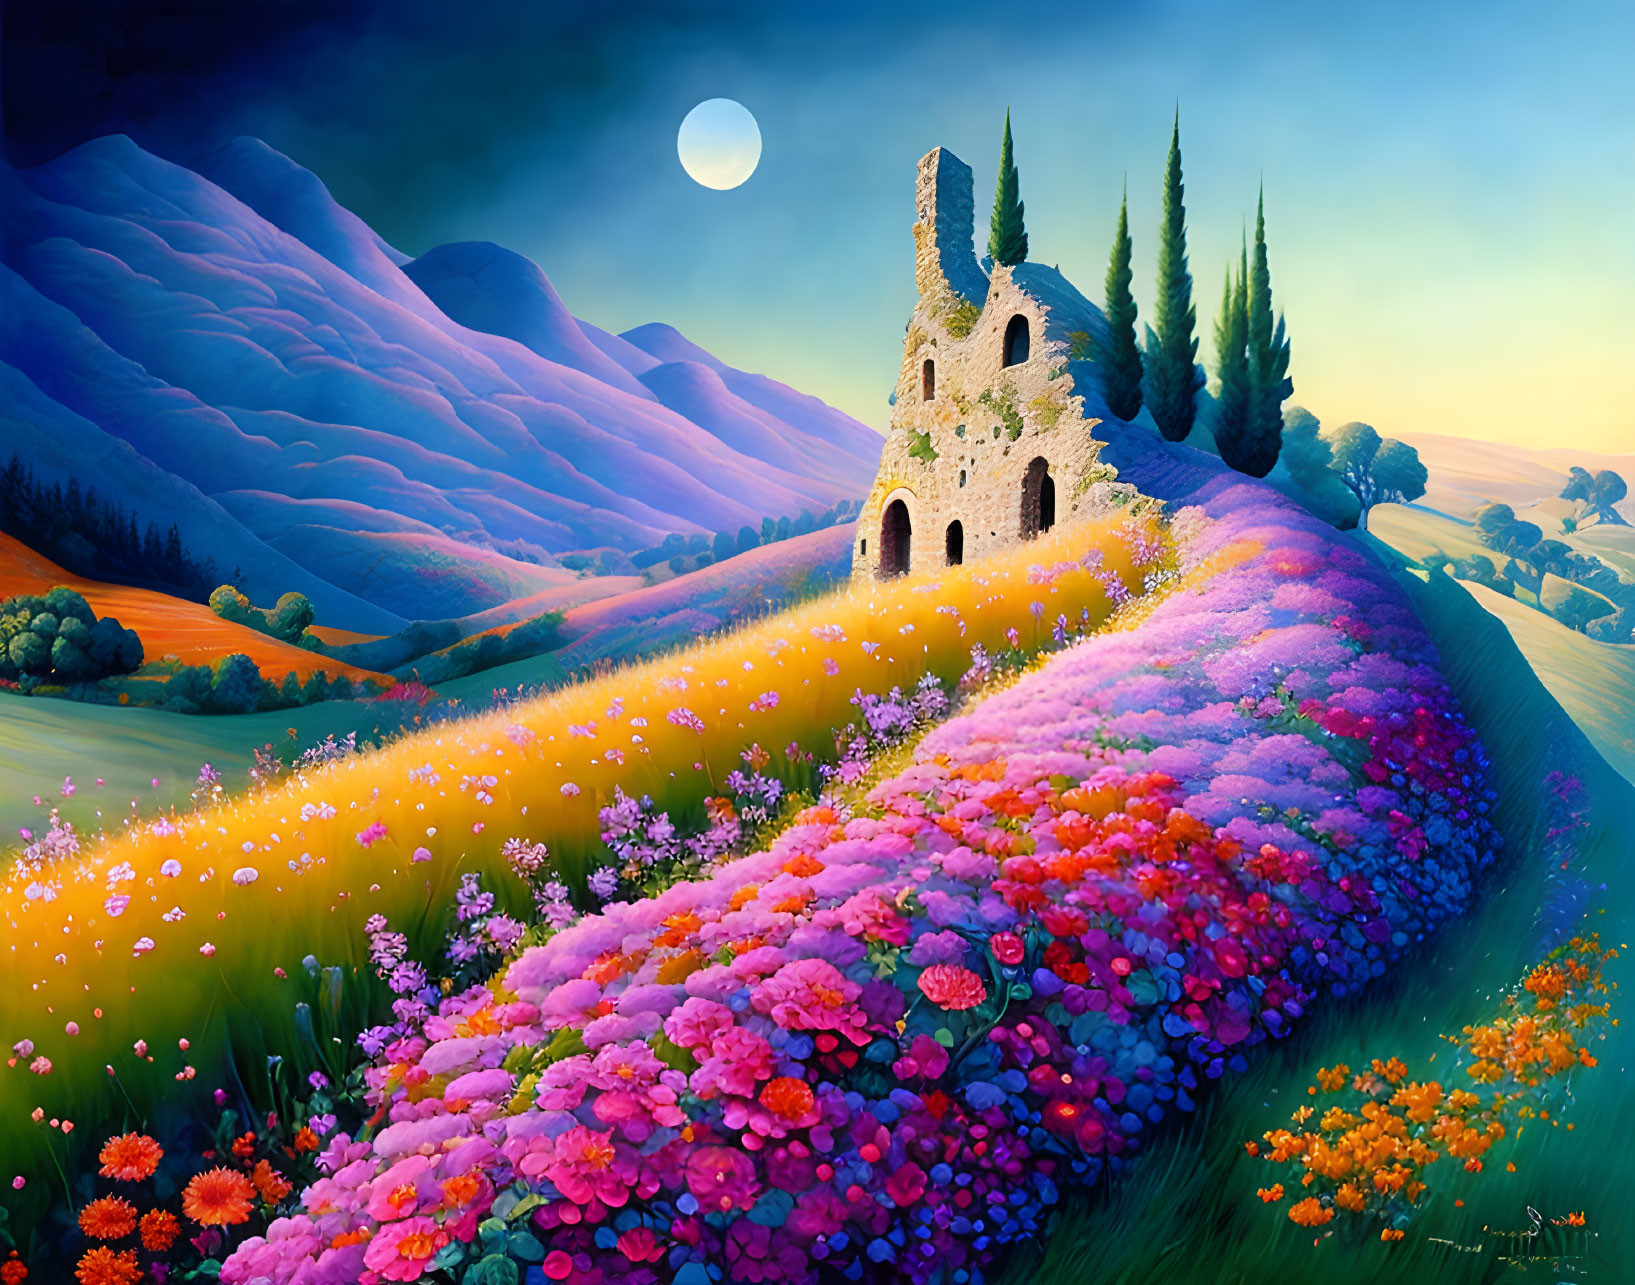 Fantasy landscape with flowers, rolling hills